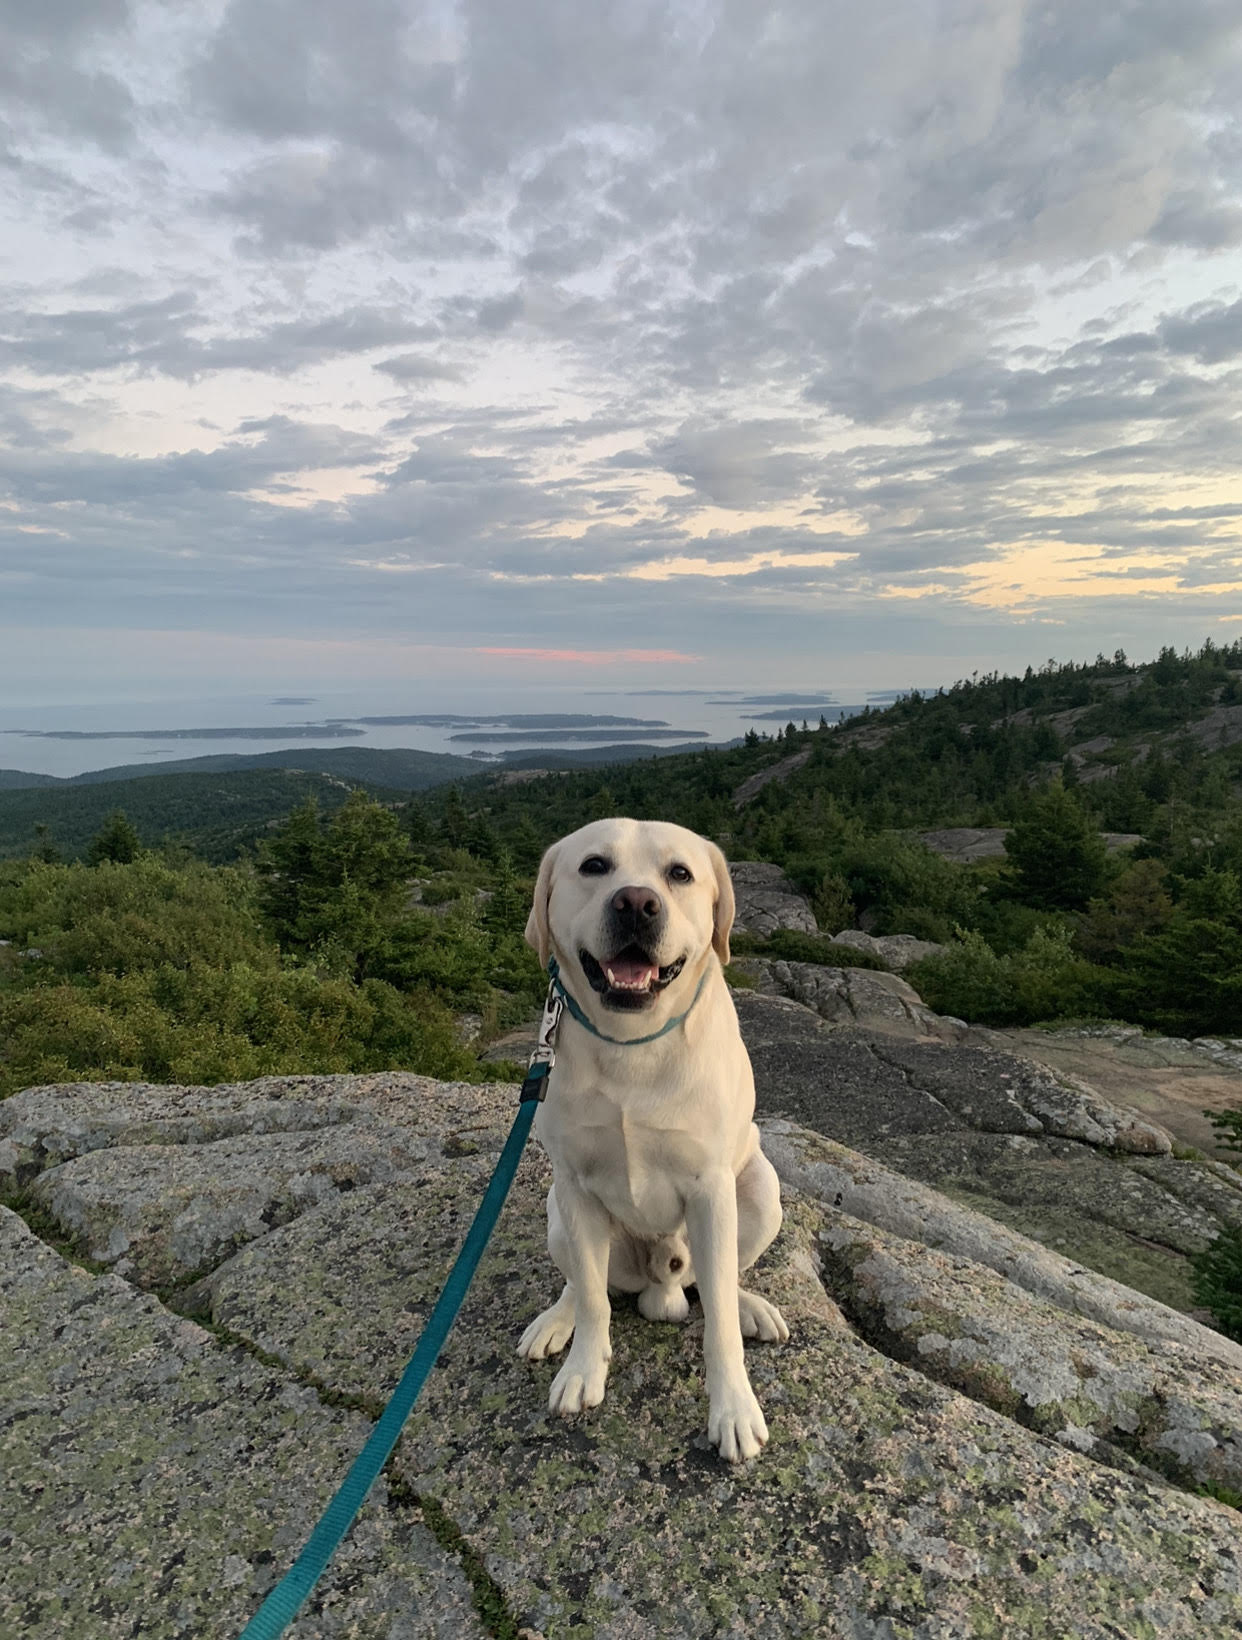 Image of Teddy the yellow Labrador Retriever sitting on a rocky surface with a mountain top scenic view in the background. 